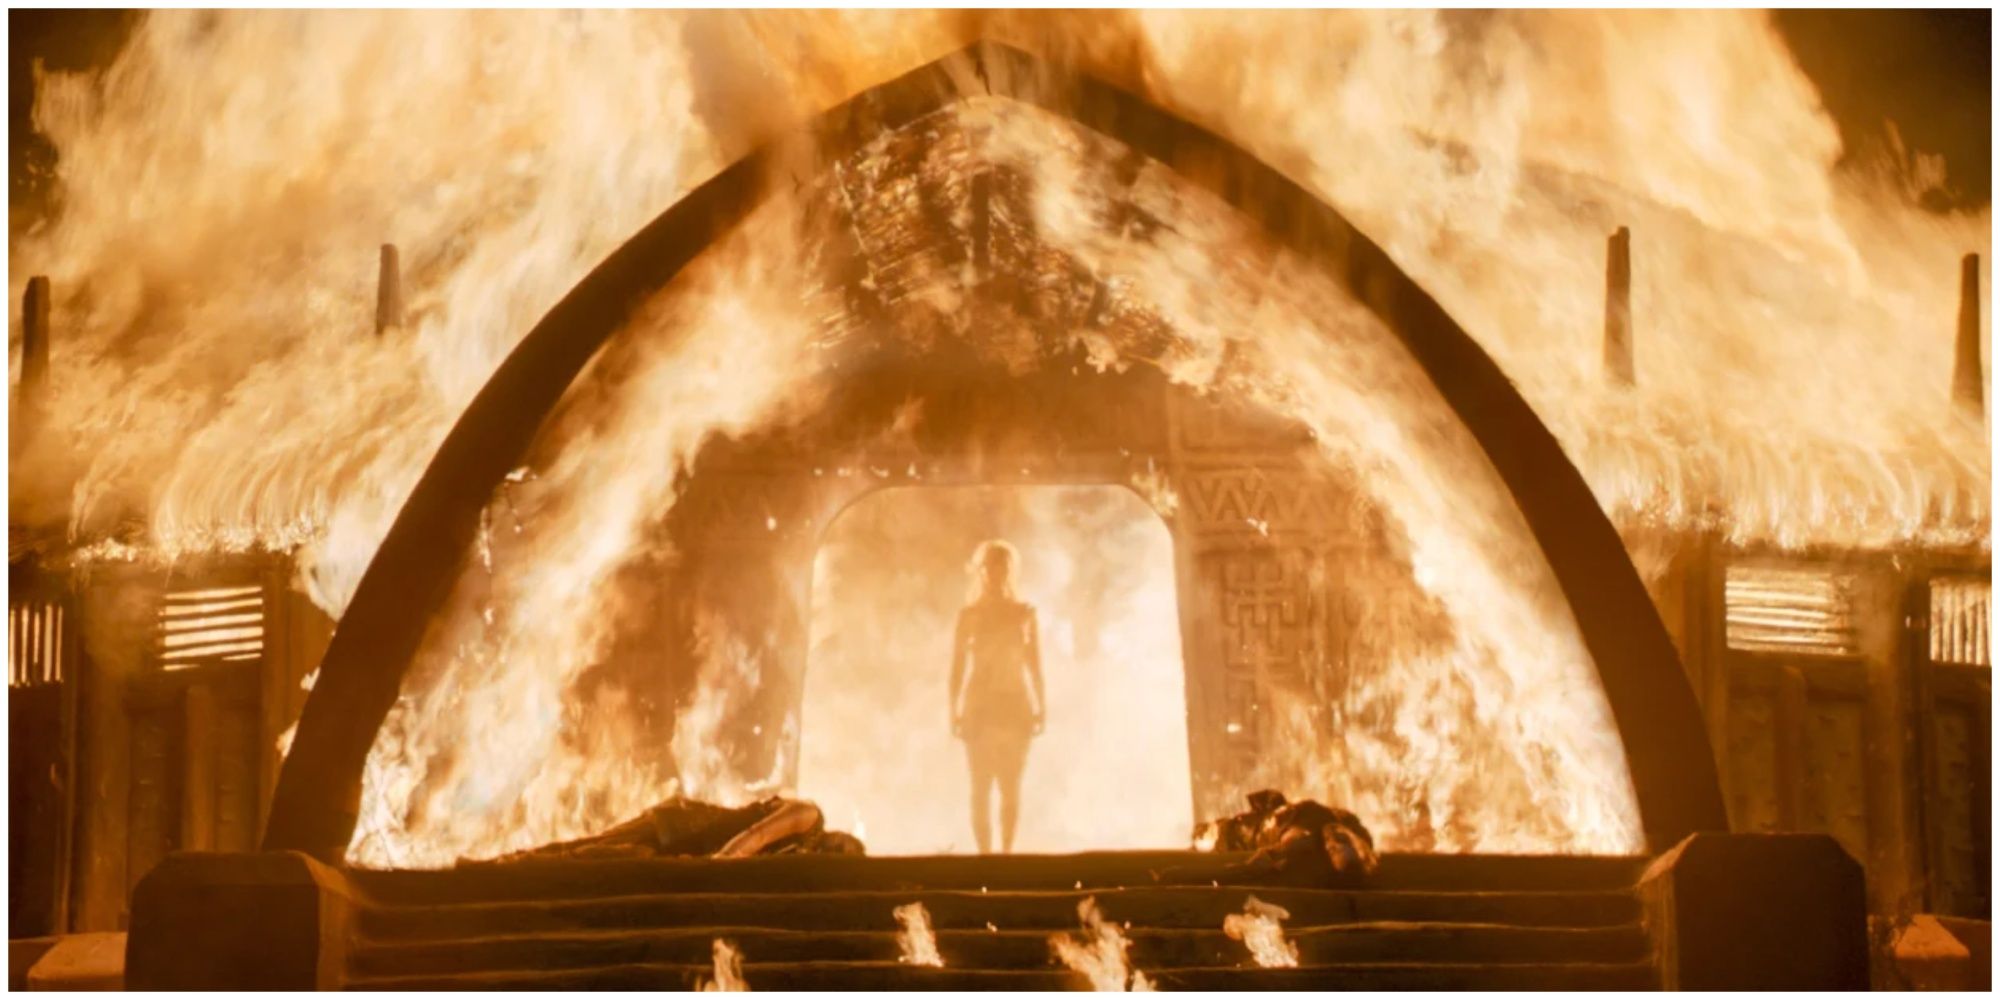 Daenerys Targaryen emerges from the burning Temple of the Dosh Khaleen in Game of Thrones.